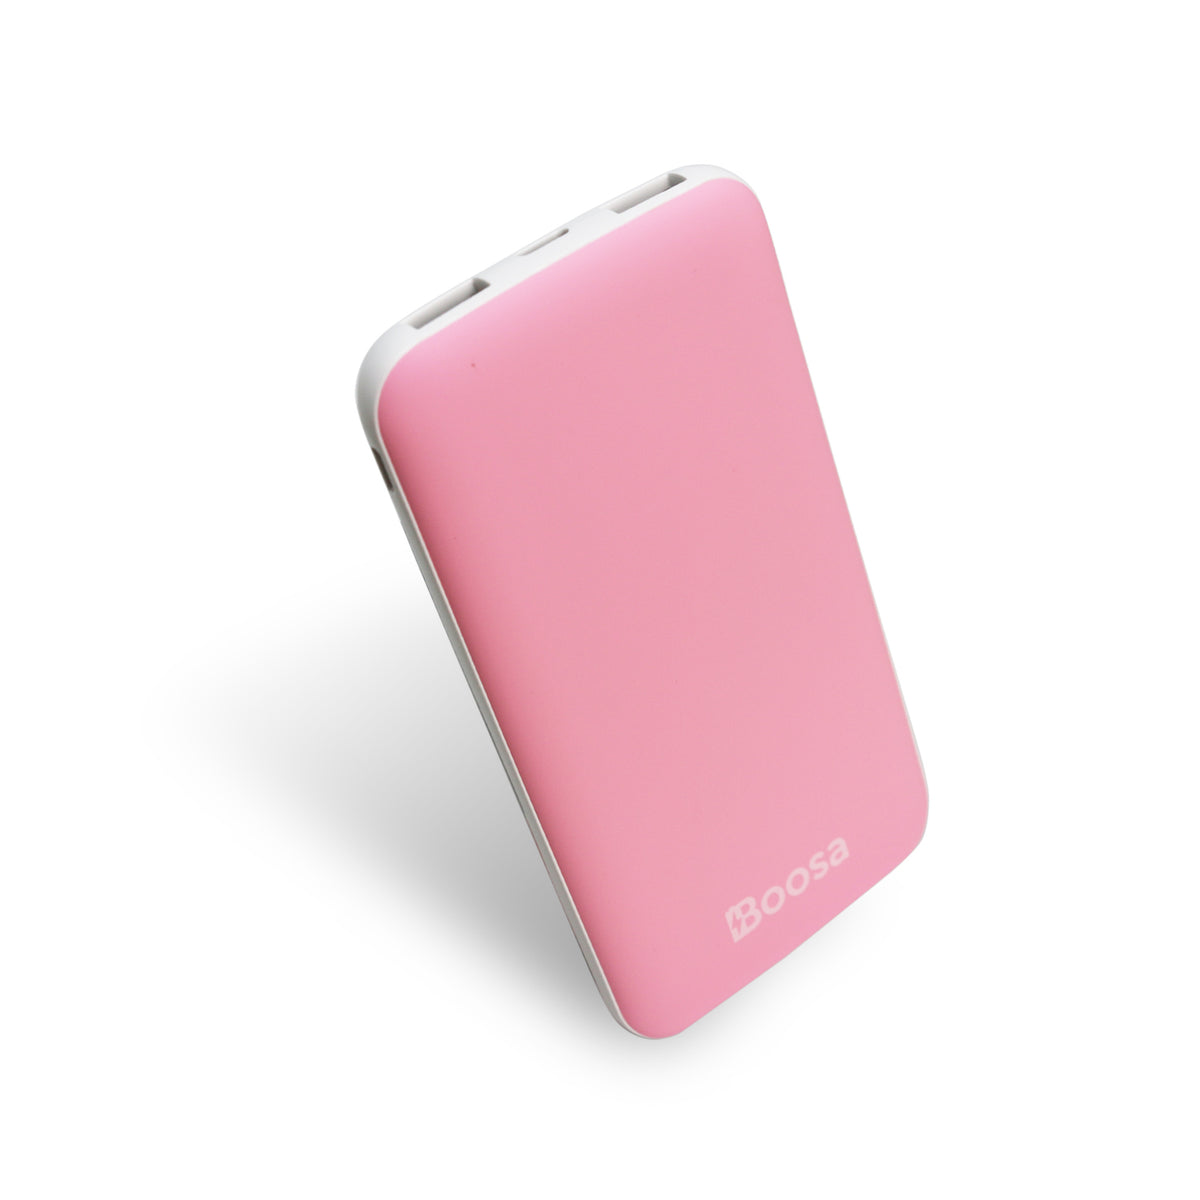 Boosa Macro™ Power Bank - Fast 10000mAh USB-C Portable Phone Charger for iPhone and Android